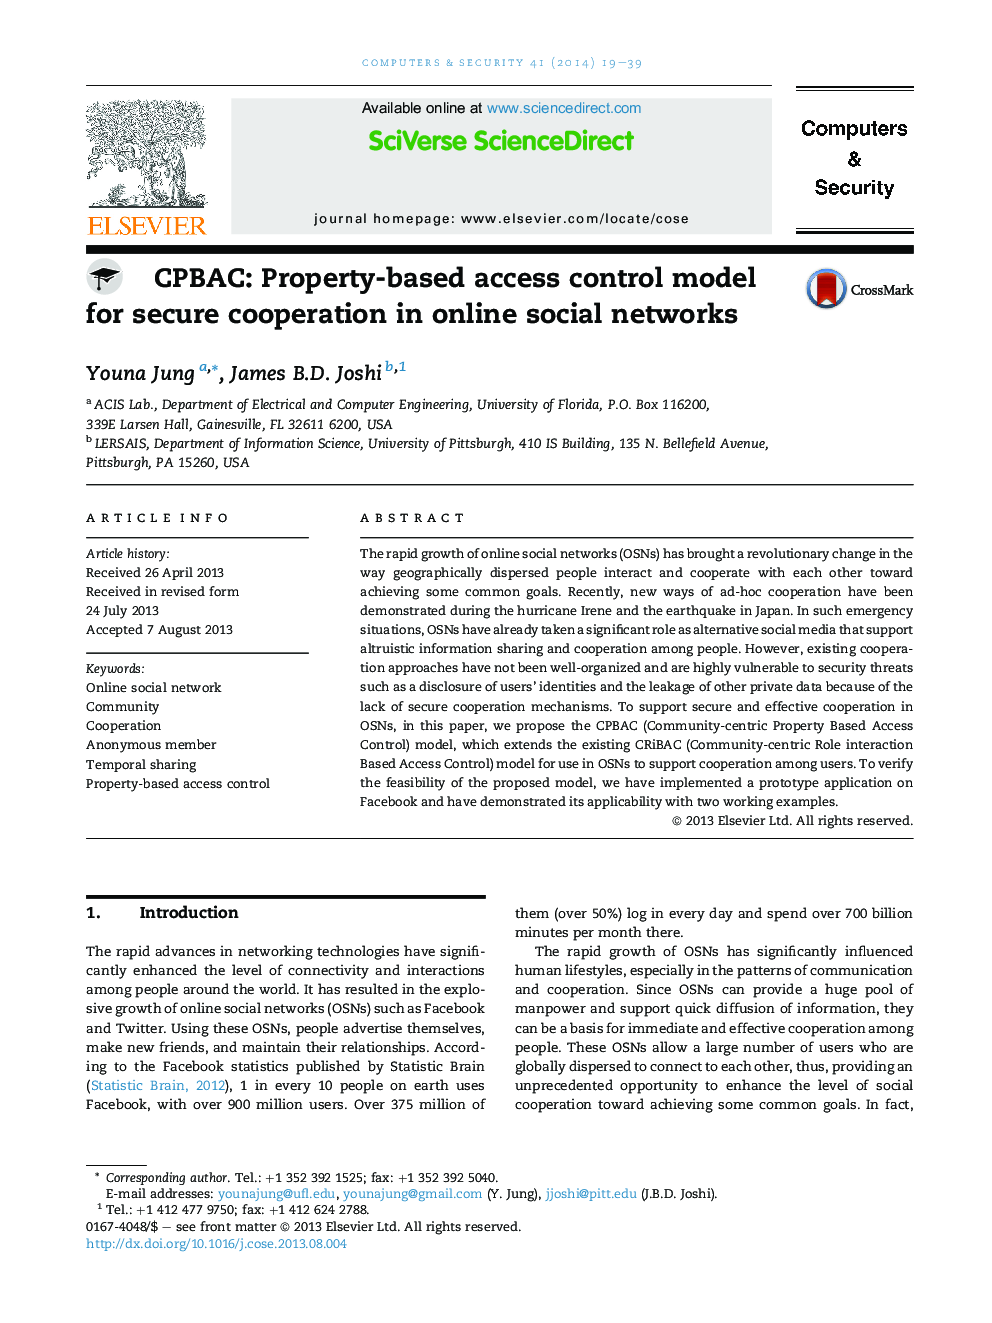 CPBAC: Property-based access control model for secure cooperation in online social networks